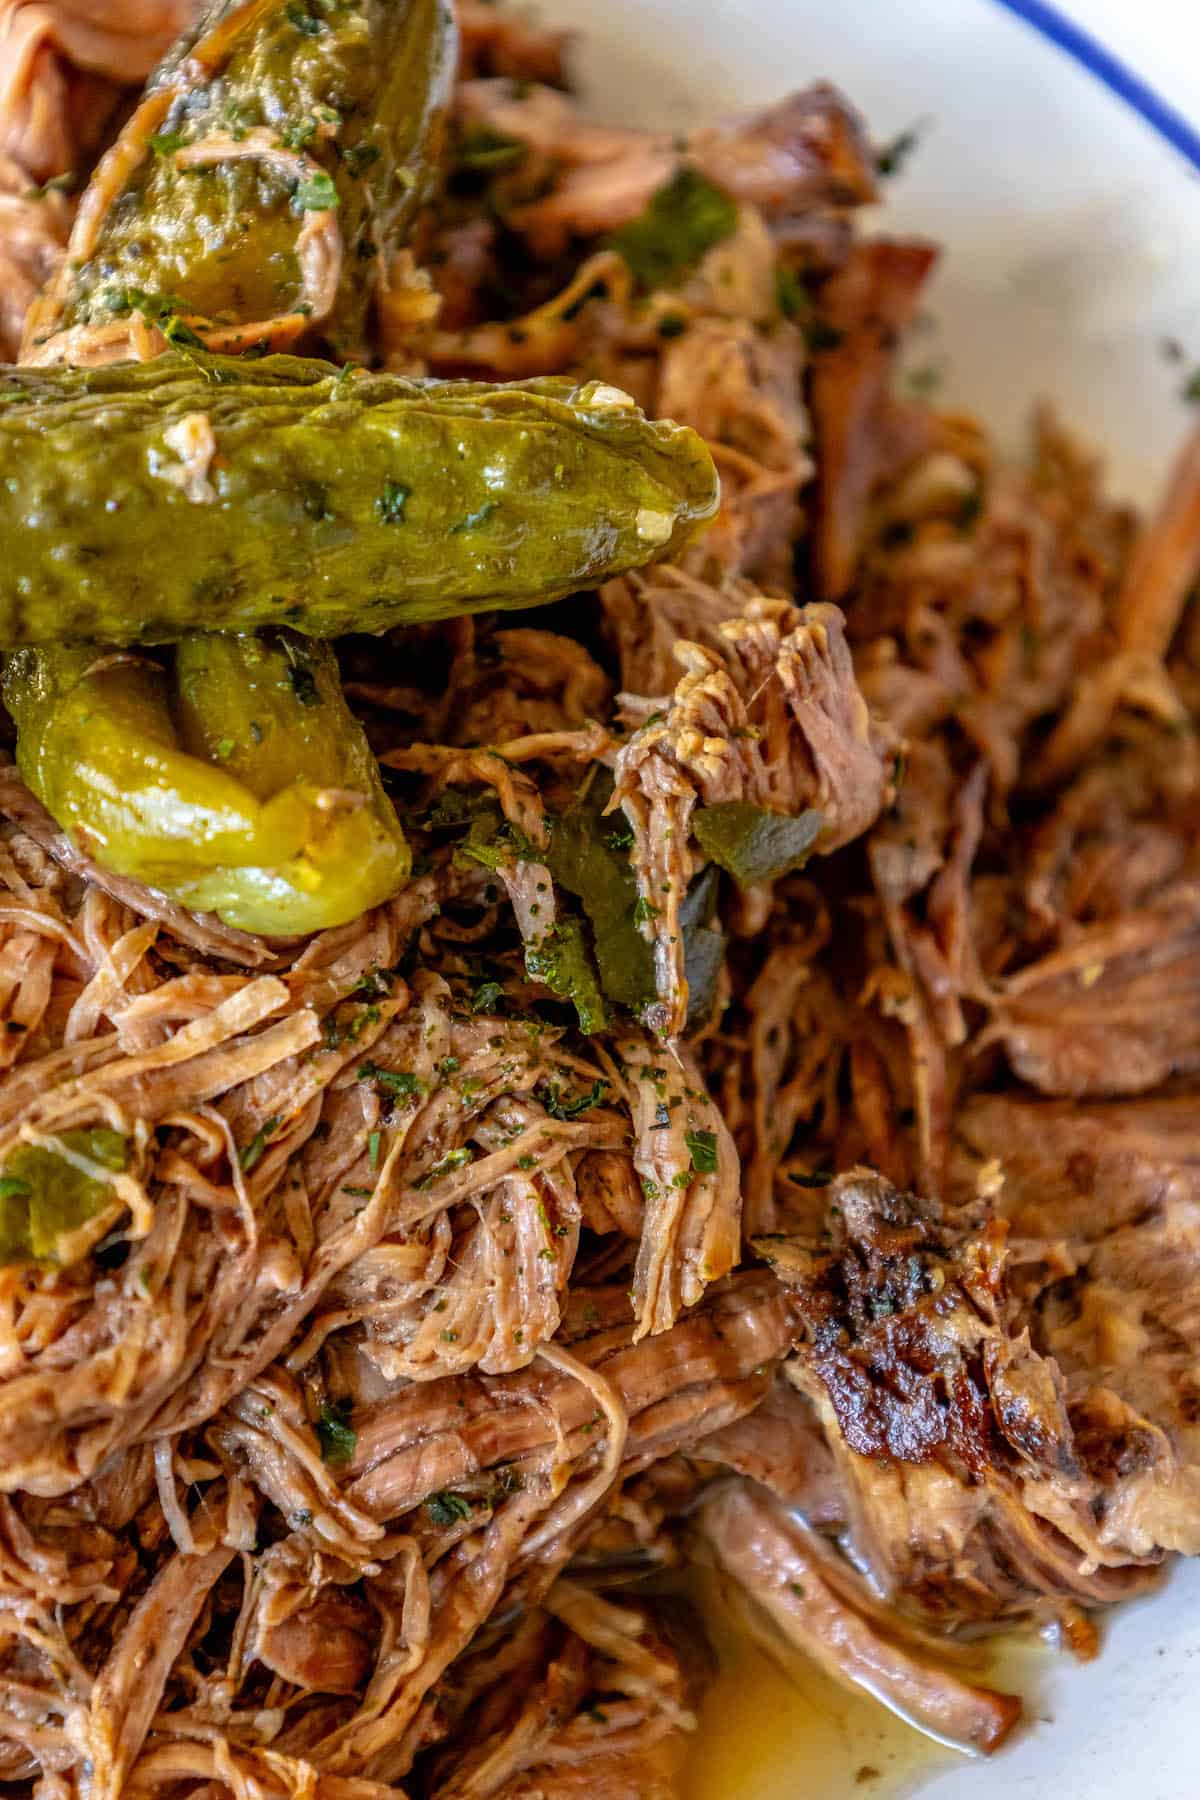 Pulled pork with pickles on a plate.